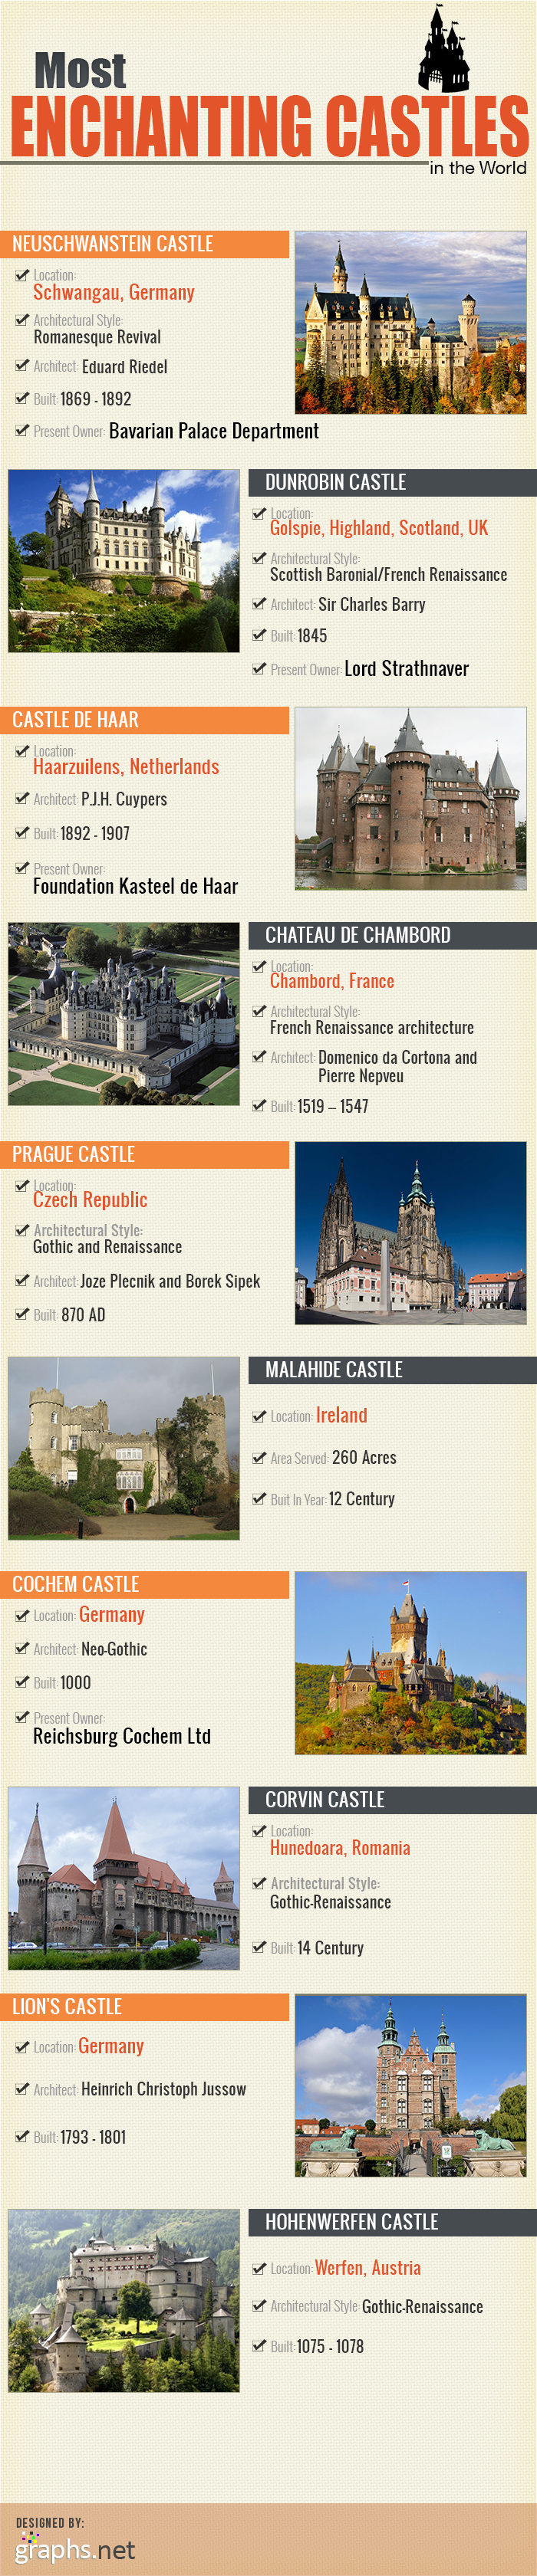 Most Enchanting Castles in the World